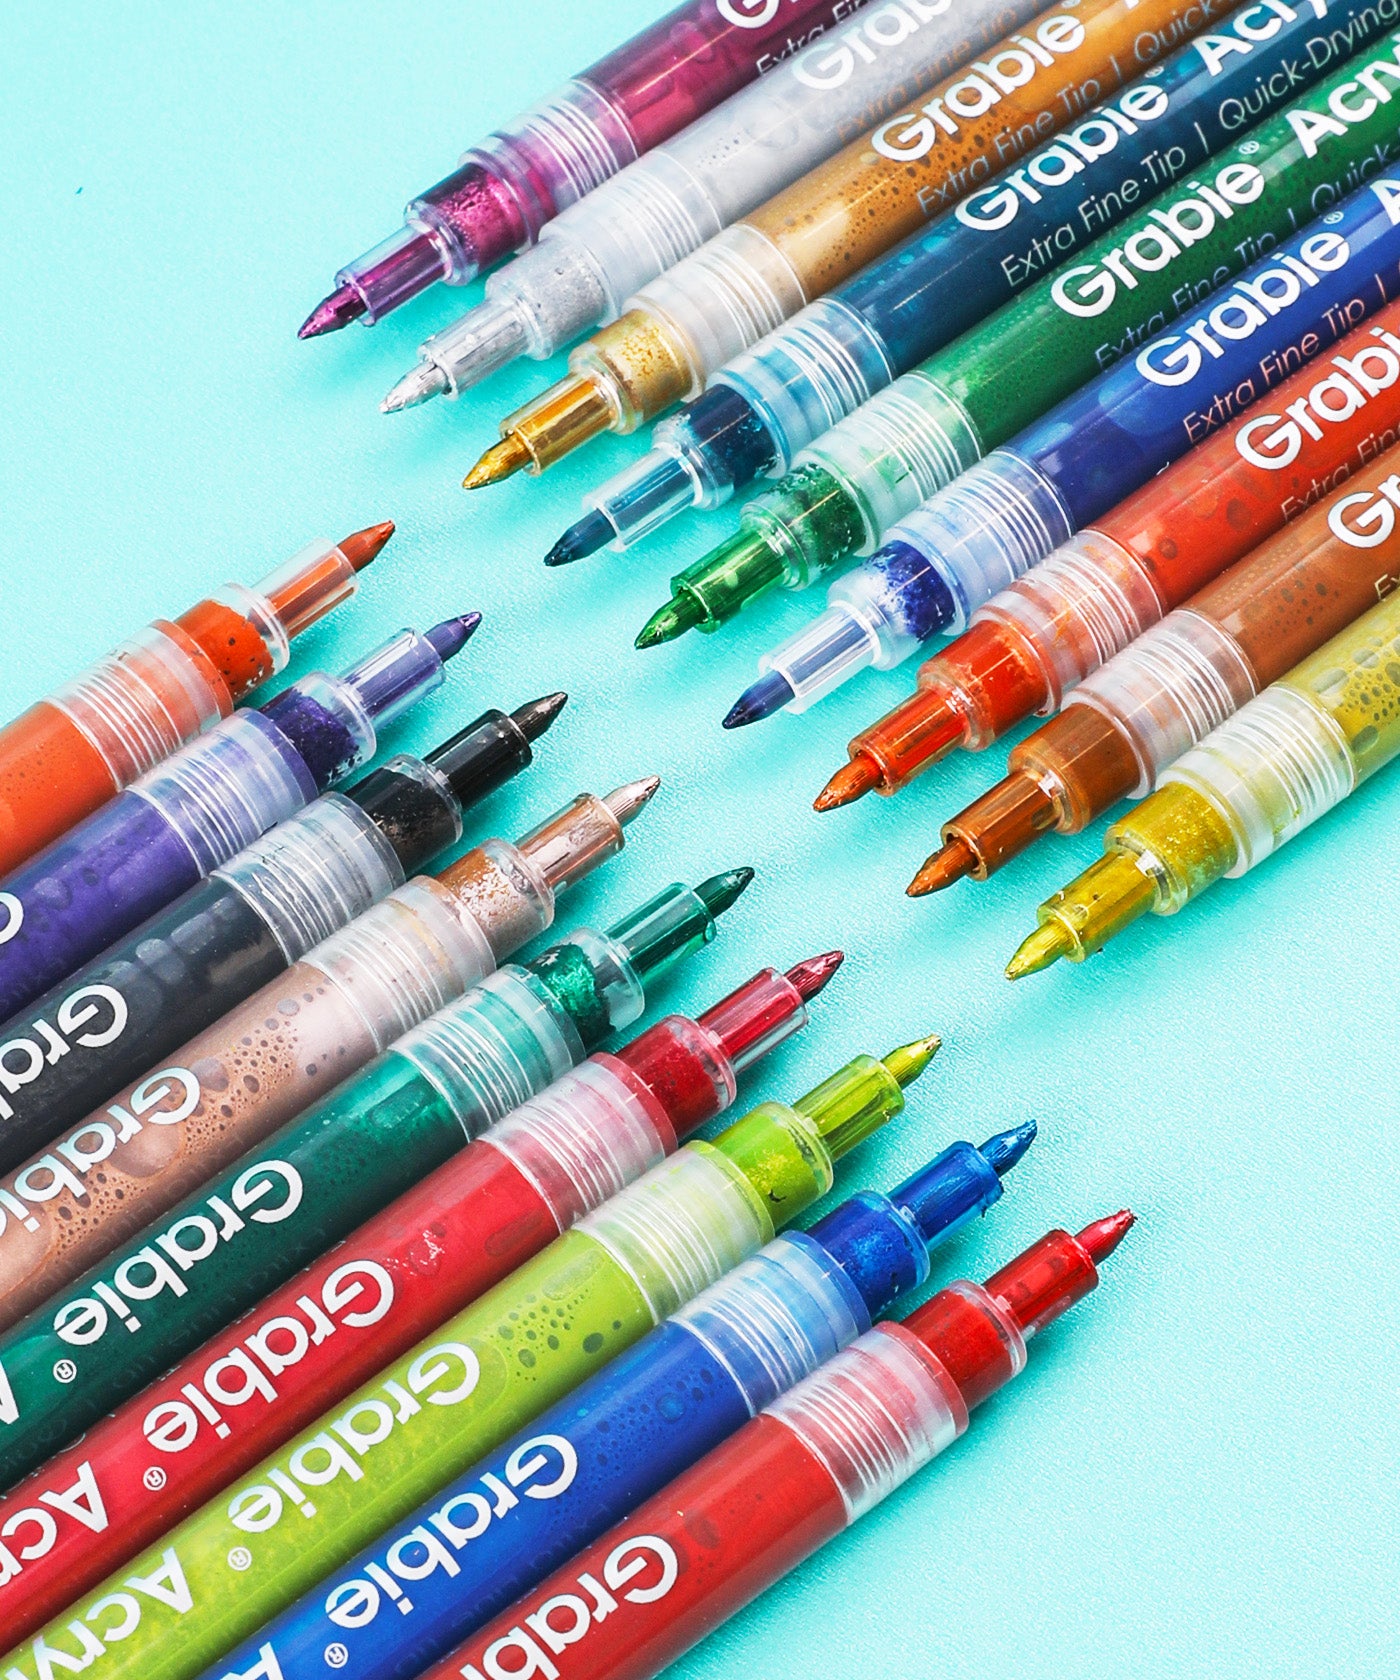 Art is not so difficult! With our Extra Fine Tip Acrylic Paint Markers, grabie acrylic markers